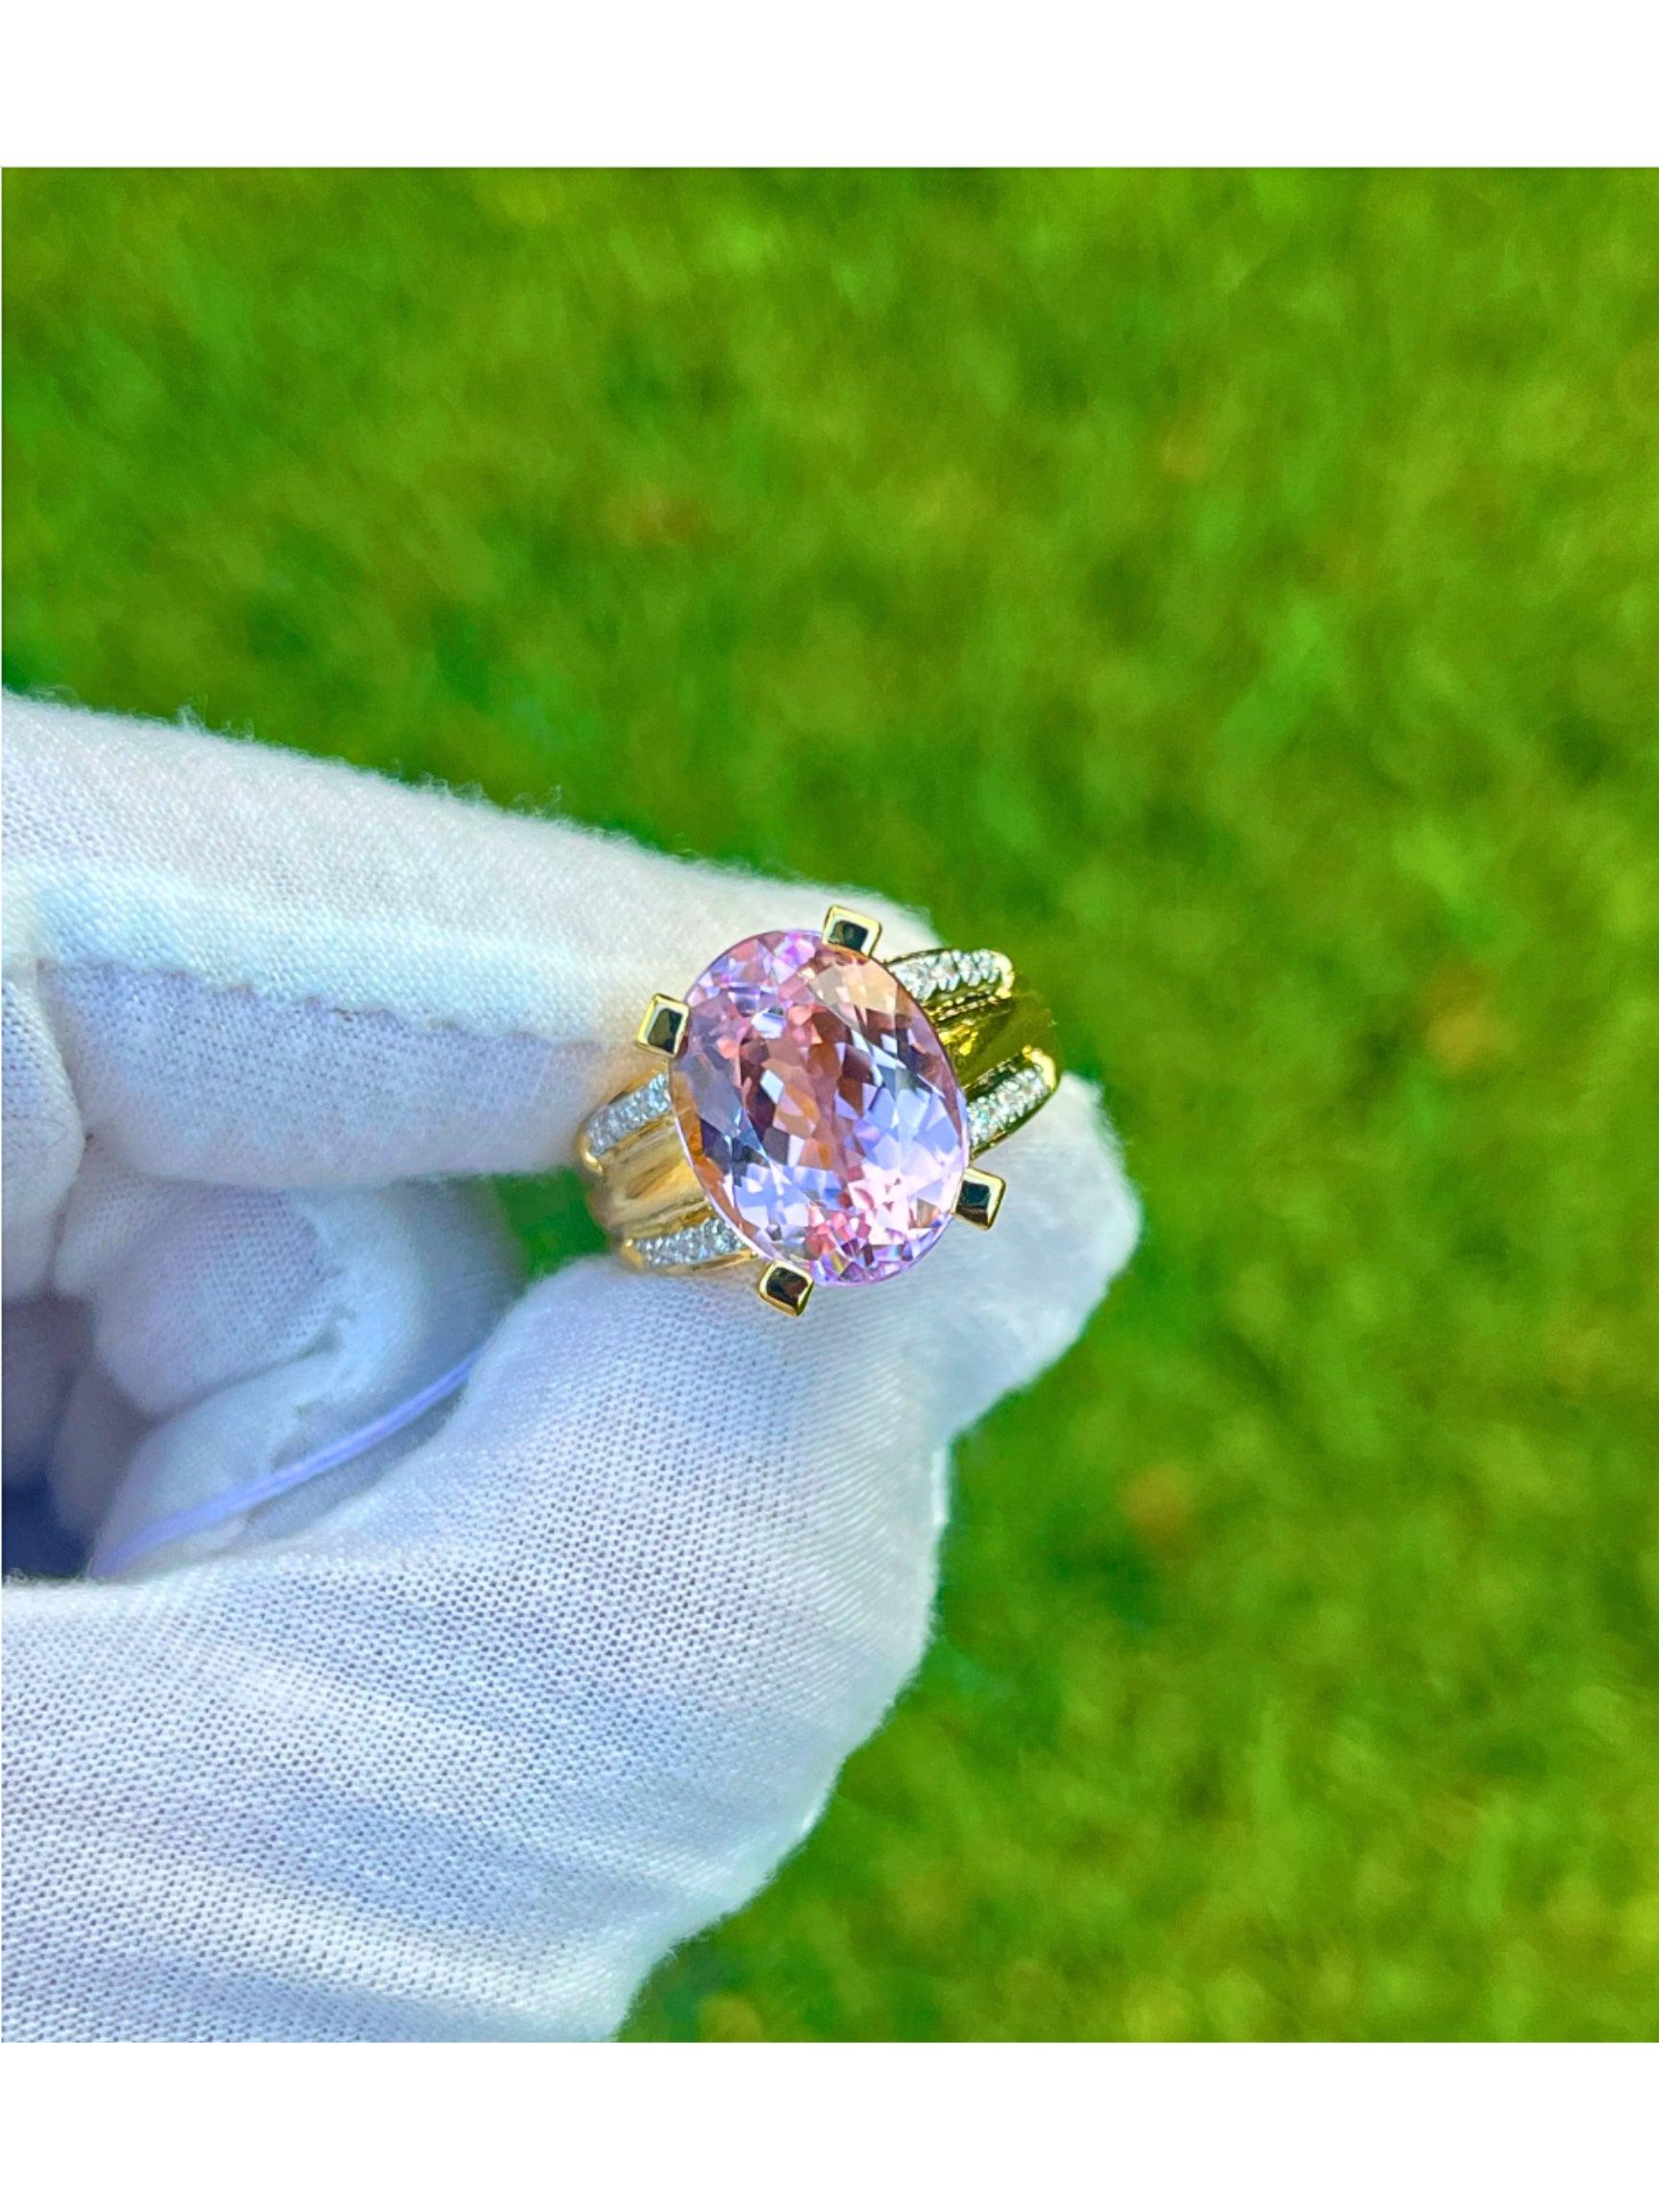 Vintage 9.50 Carat Oval Cut Pink Kunzite with Diamond Side Stone Cocktail Ring in 18K Yellow Gold-Semi Precious Jewelry-ASSAY